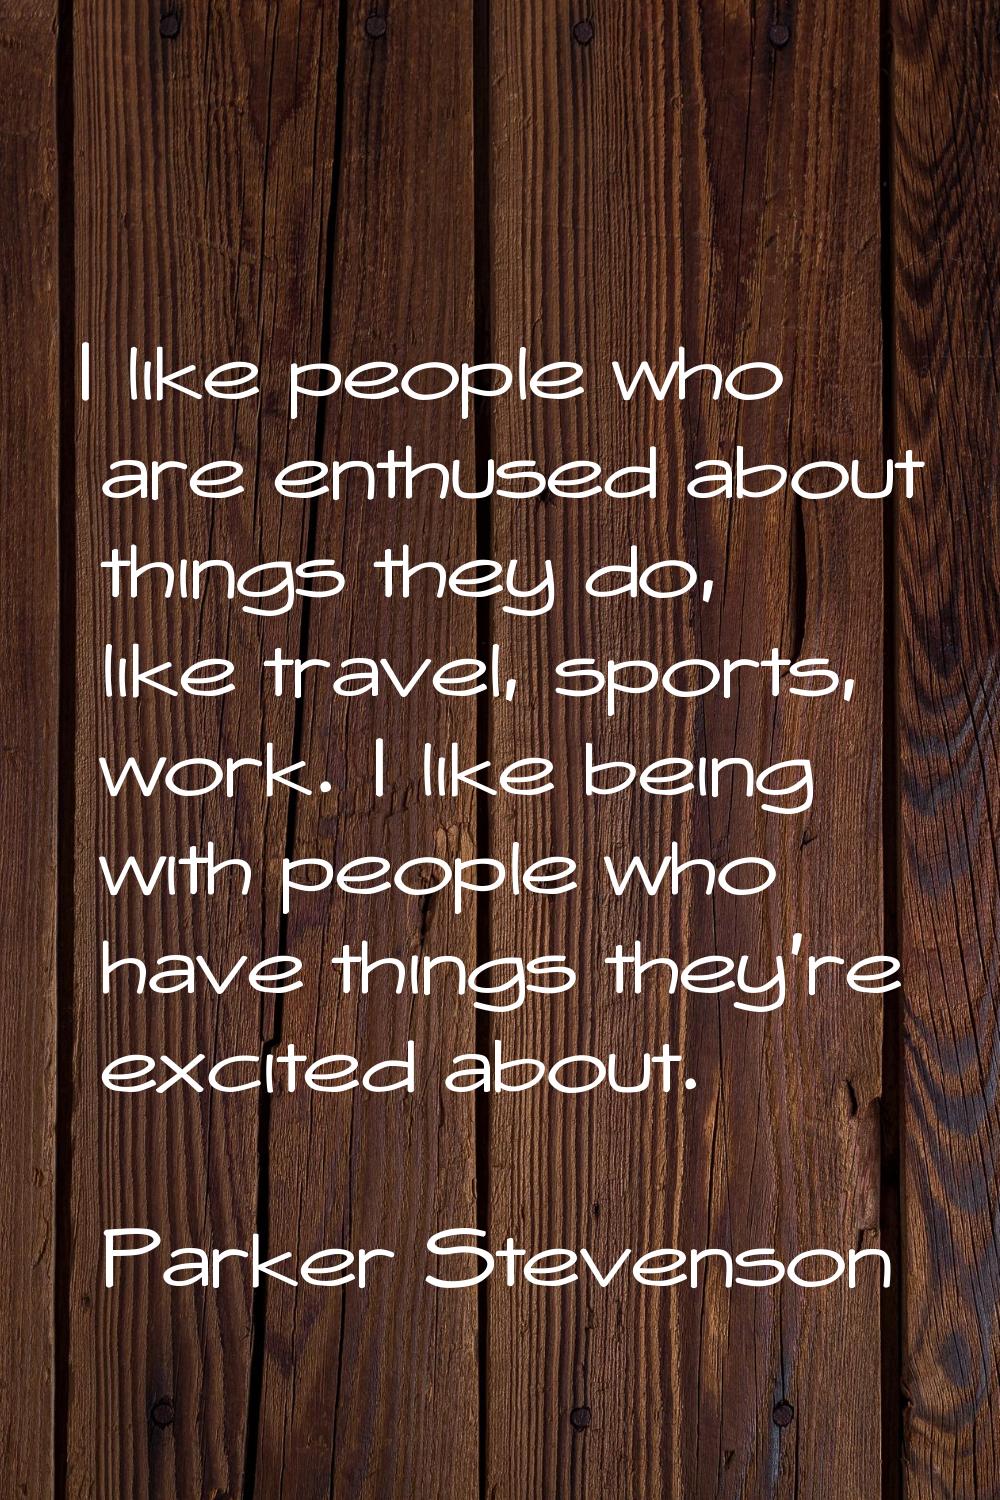 I like people who are enthused about things they do, like travel, sports, work. I like being with p